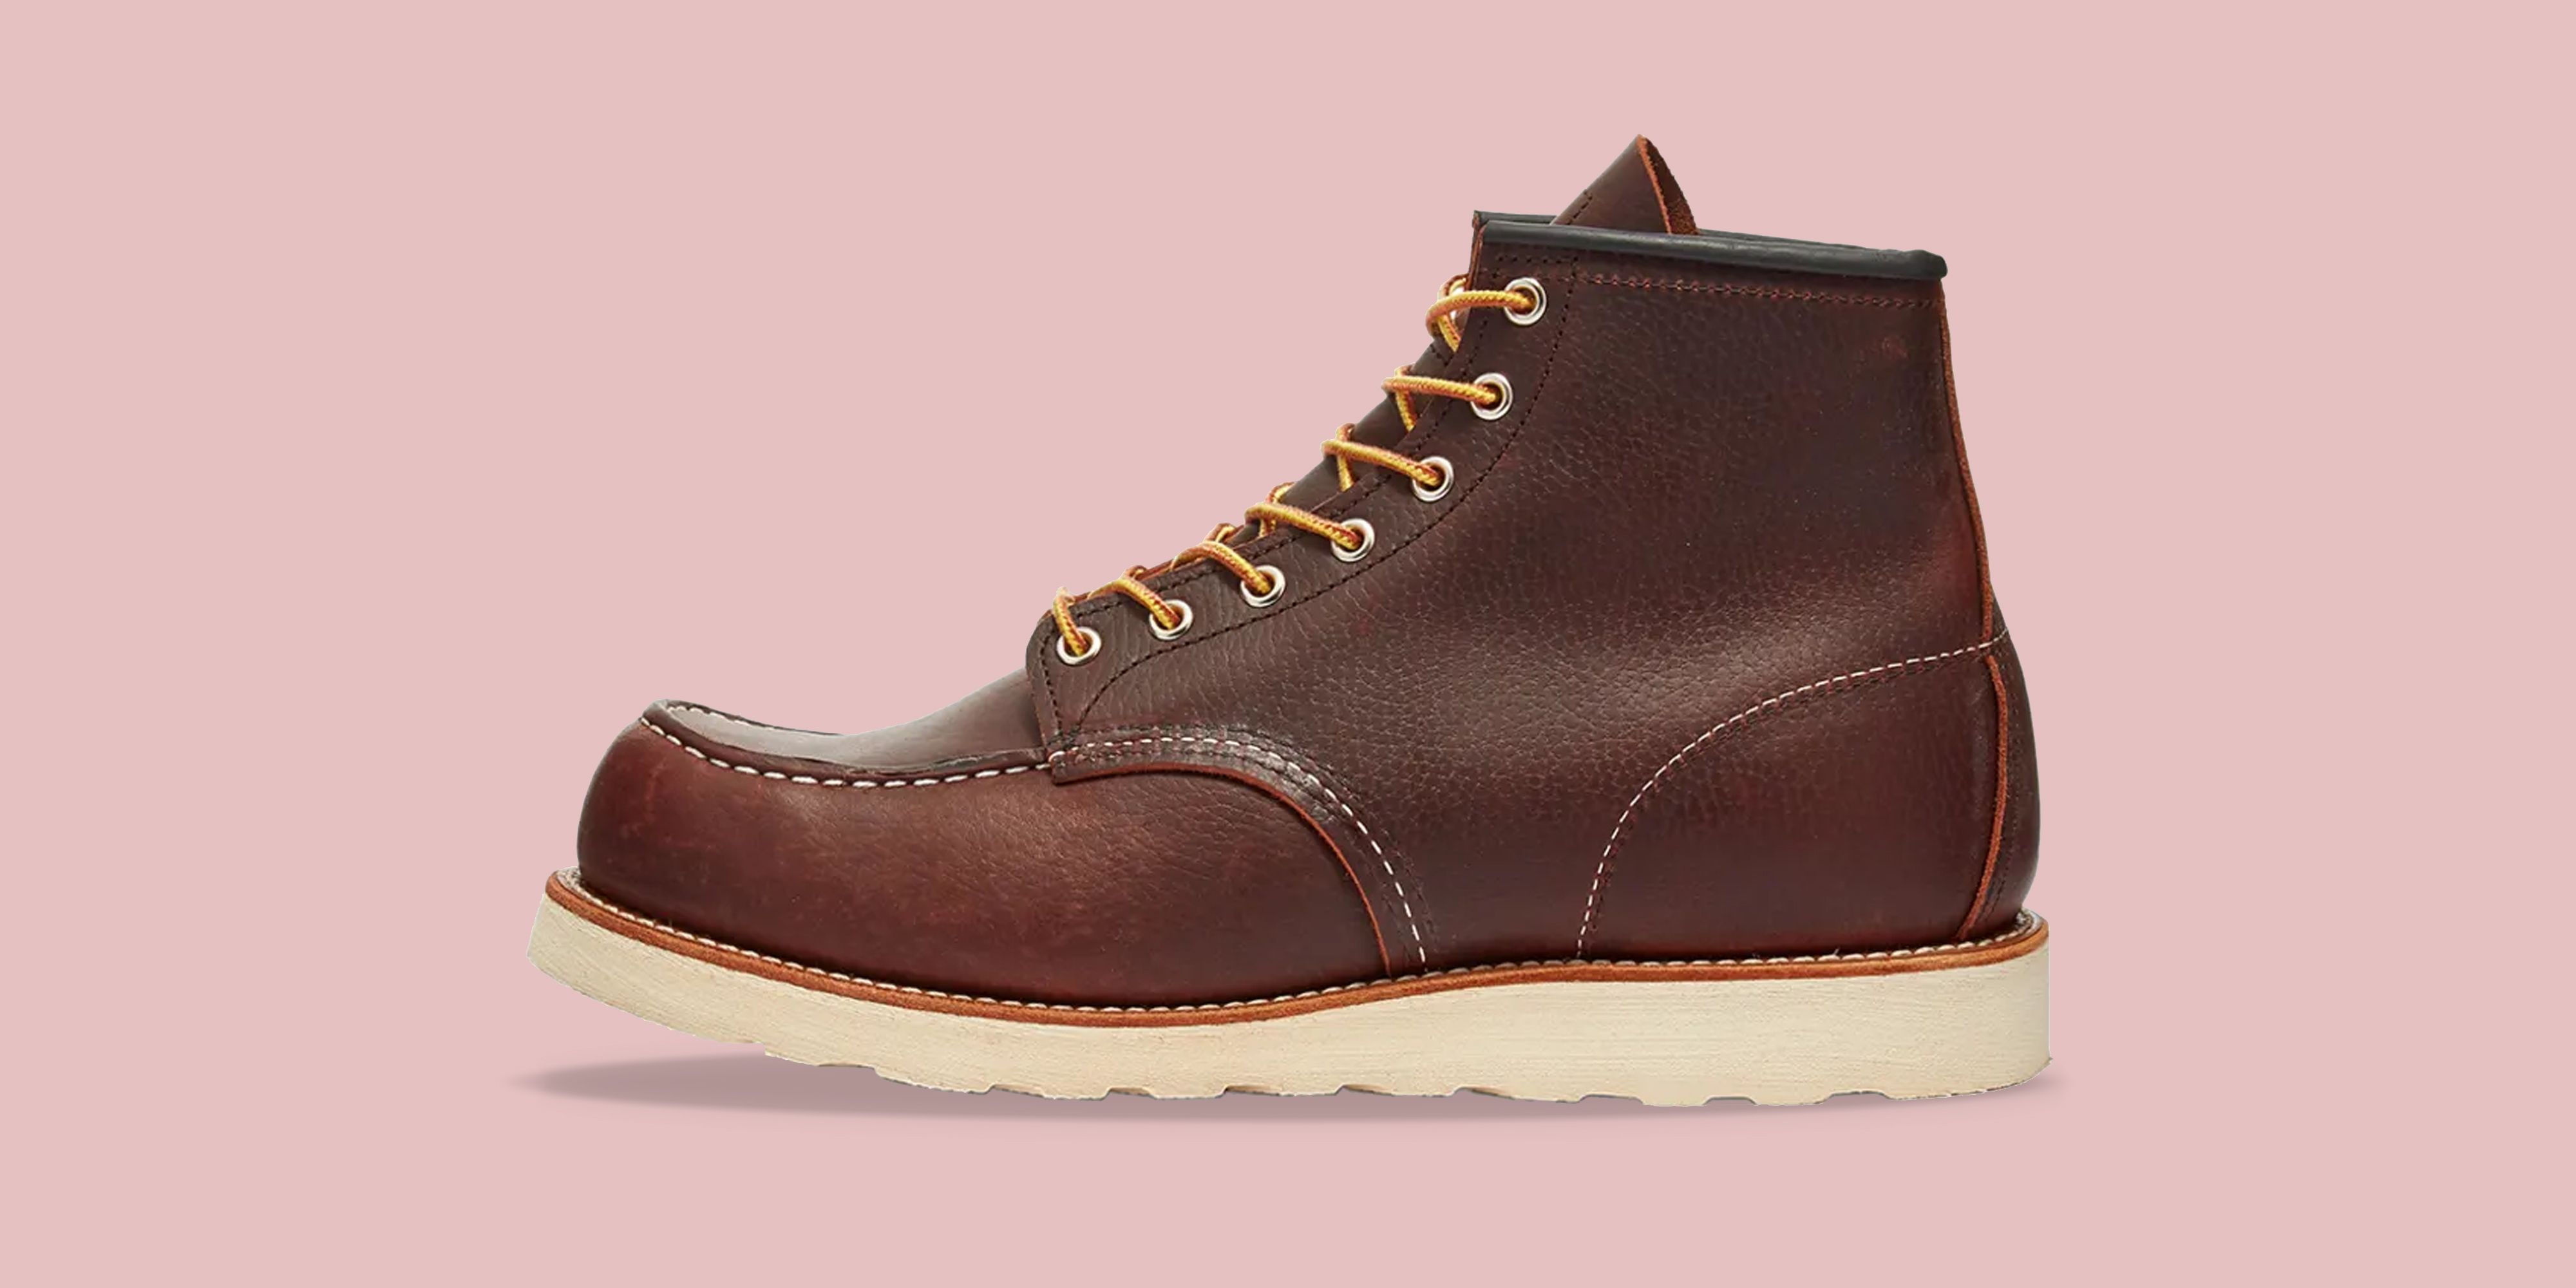 18 Work Boots That'll Get You Through the Day